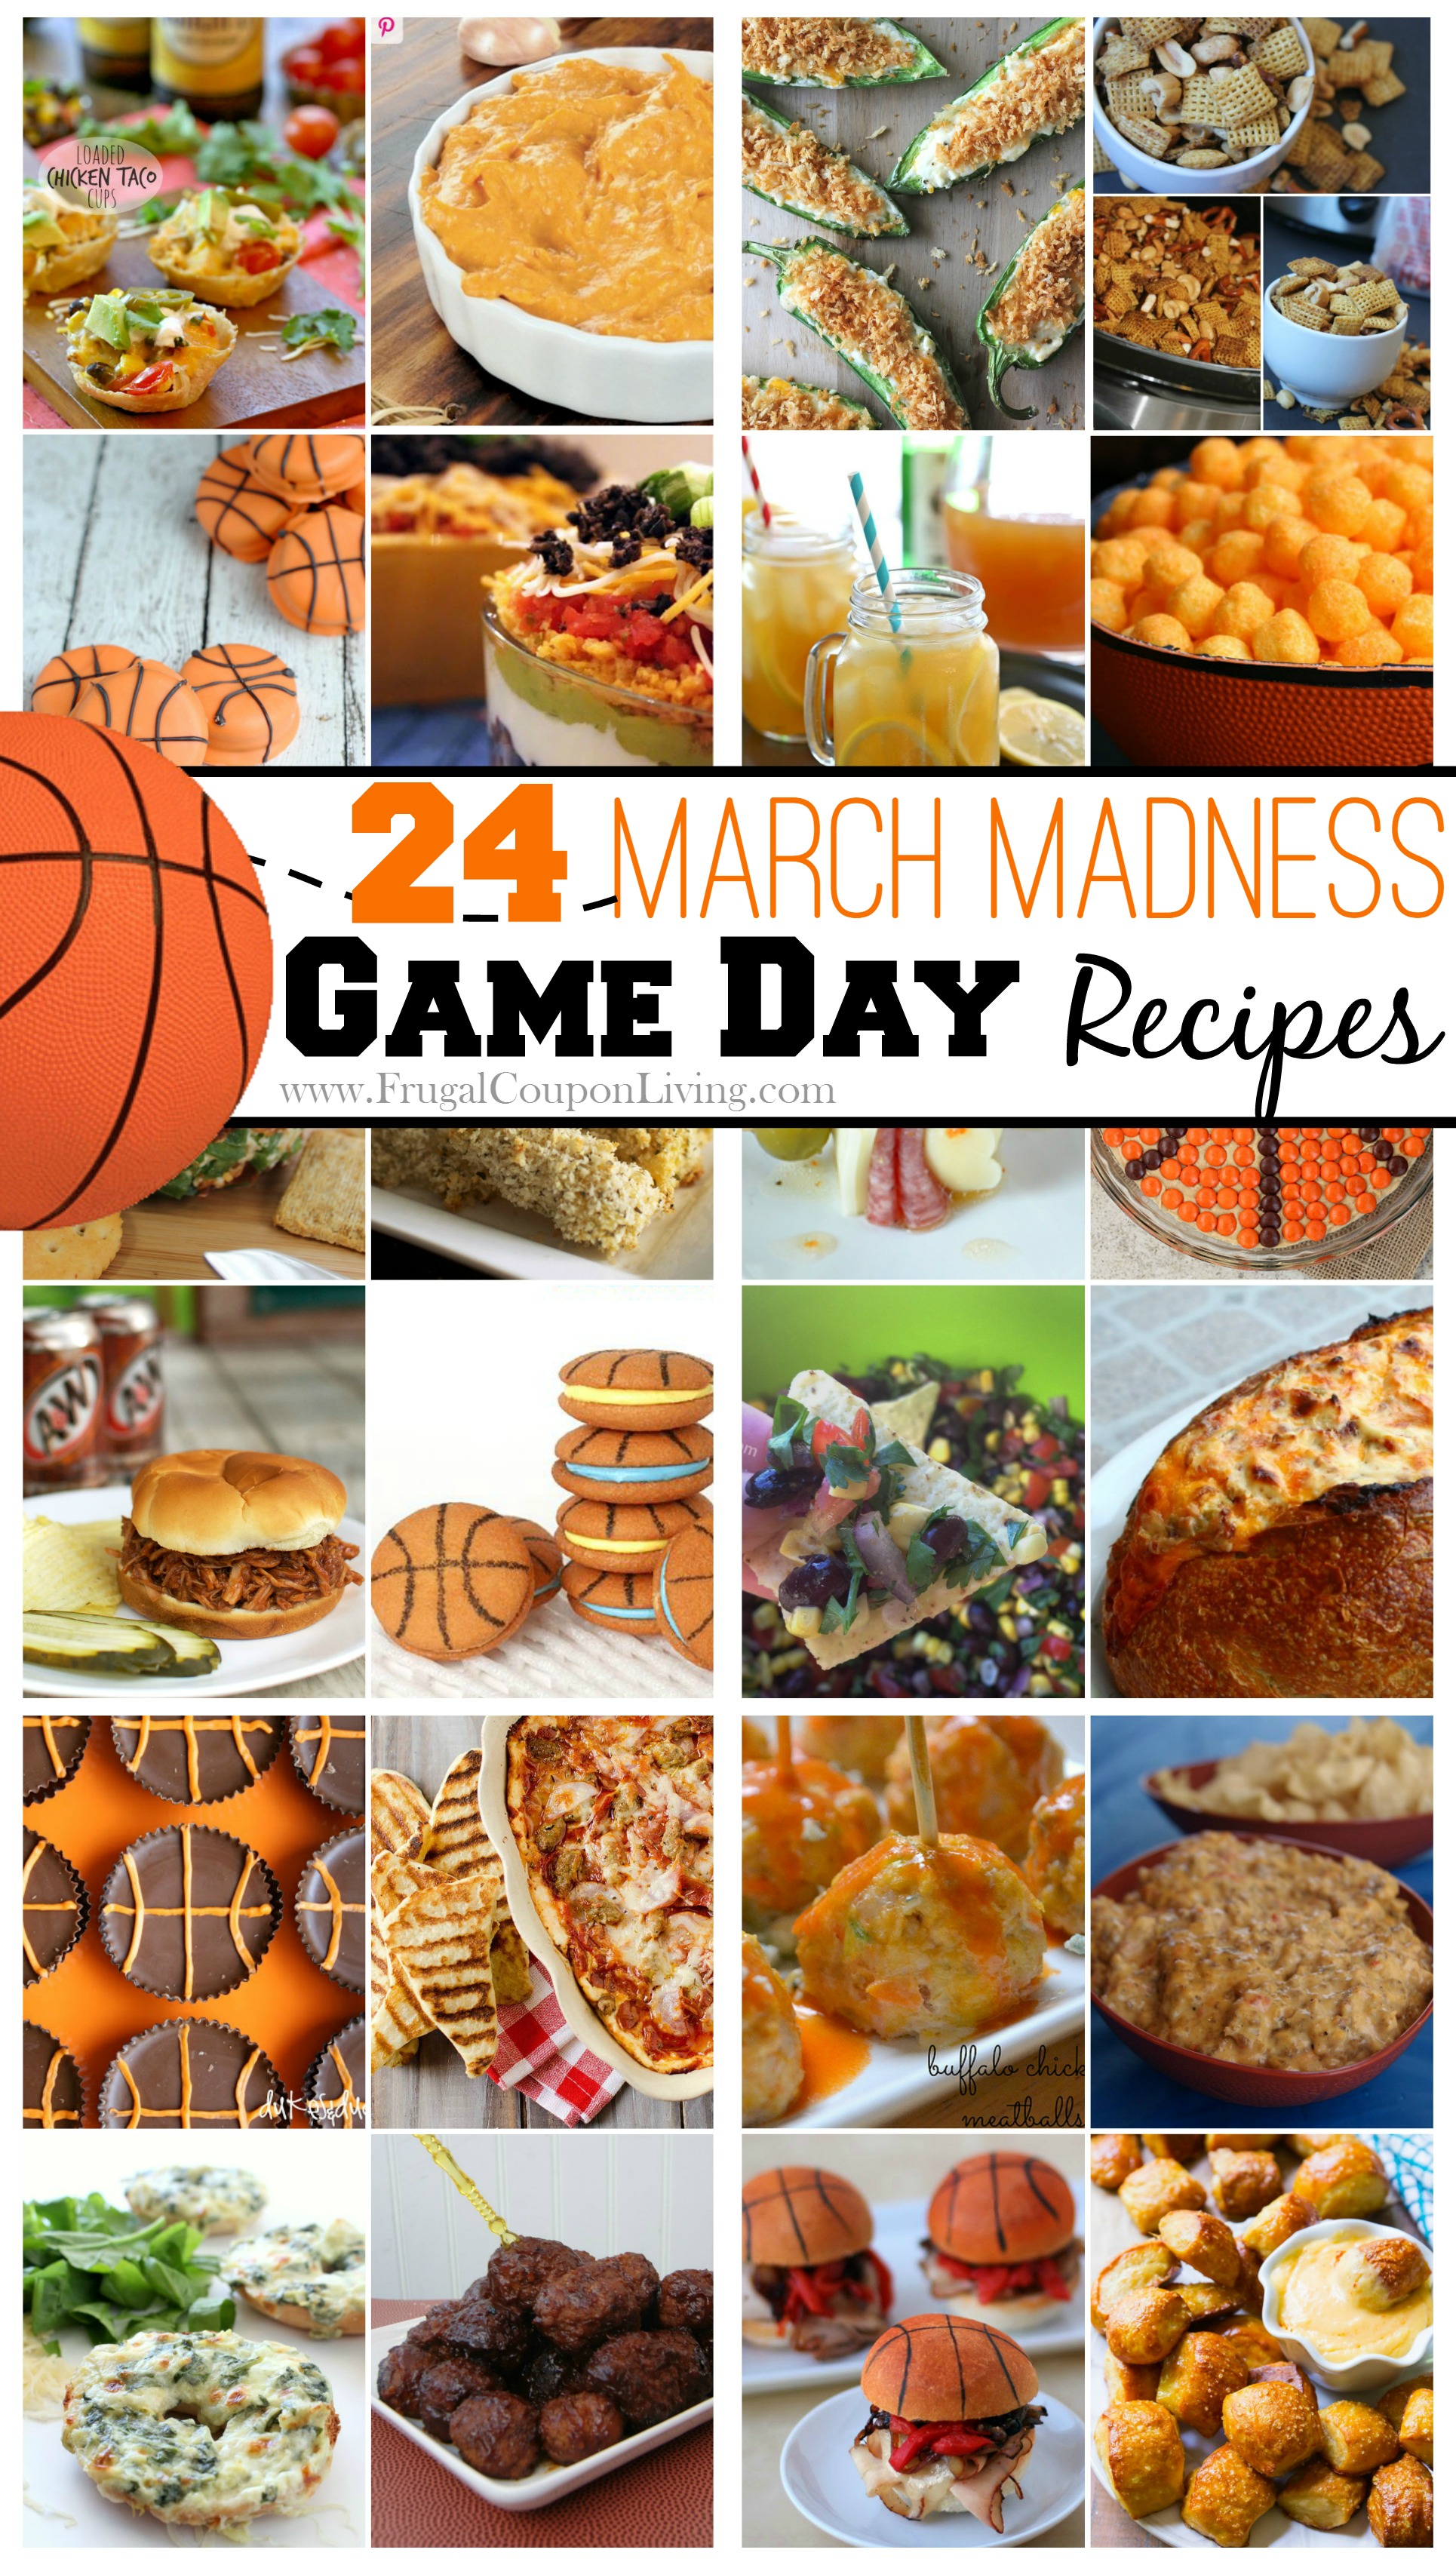 March Madness Food - Slam Dunk Bites for Your Entire Team